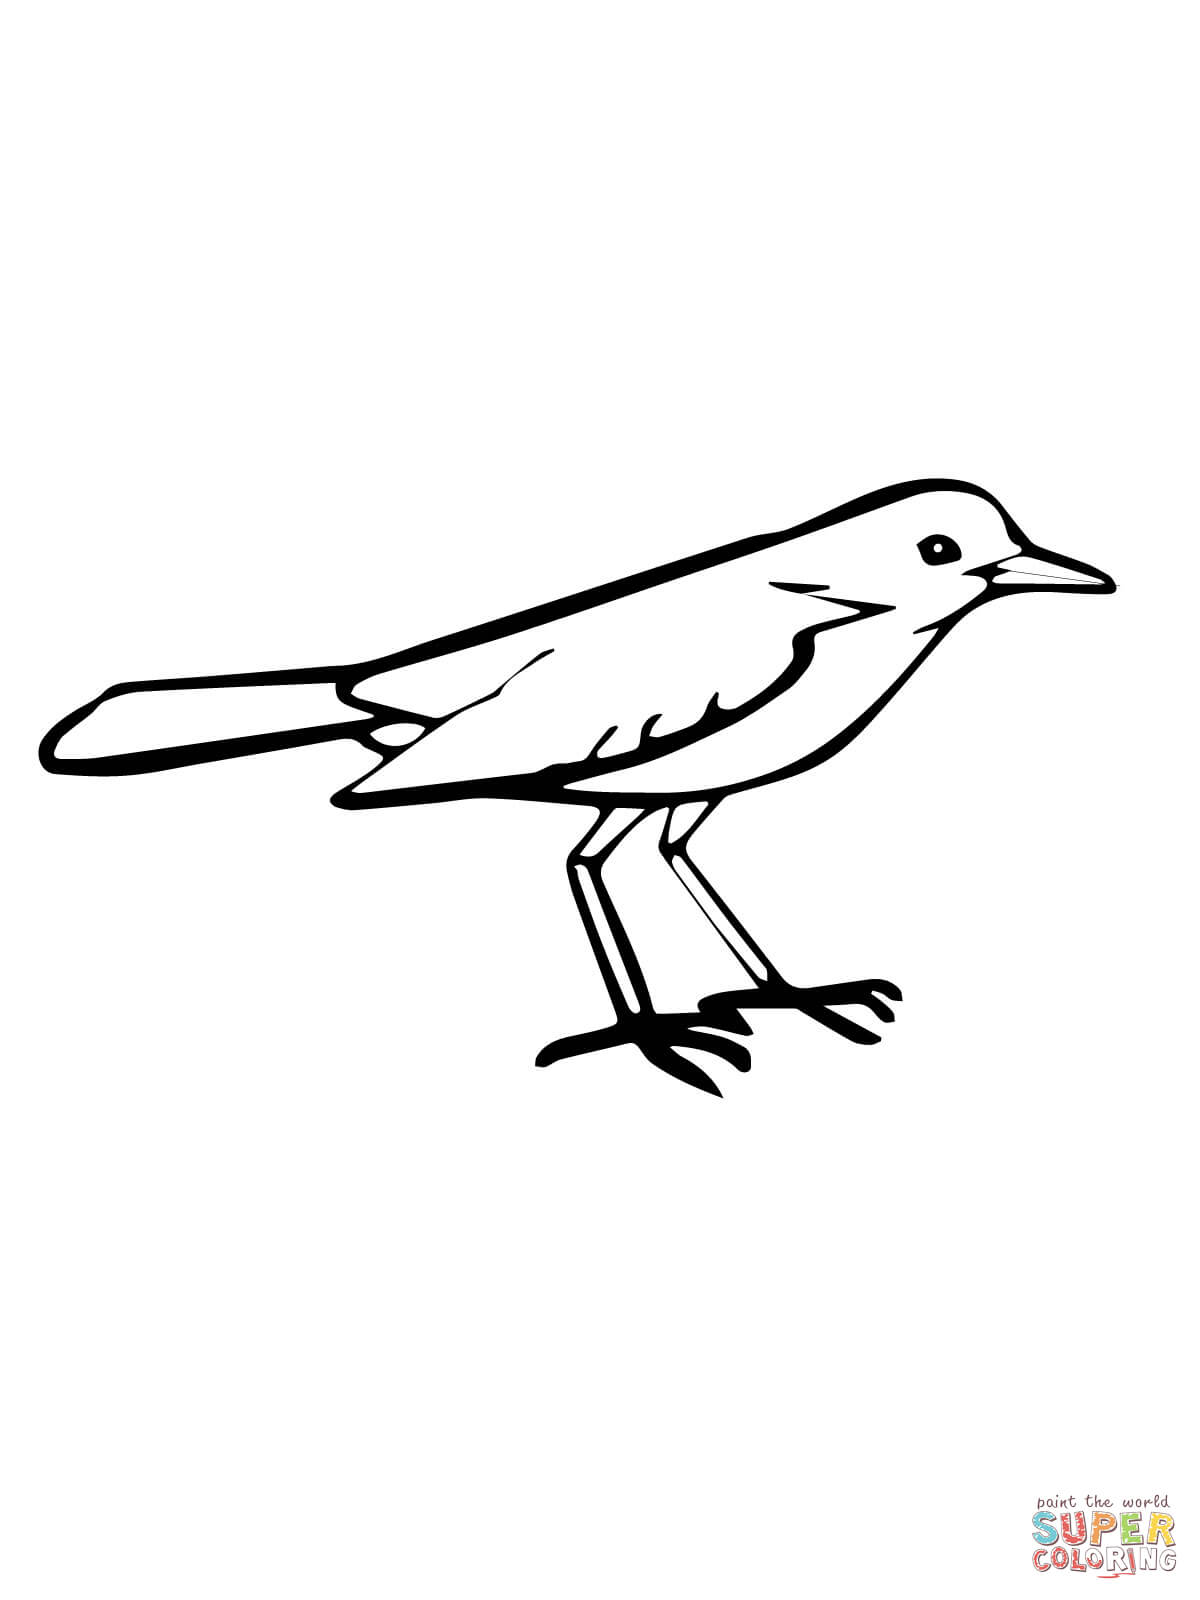 Nightingale coloring page free printable coloring pages